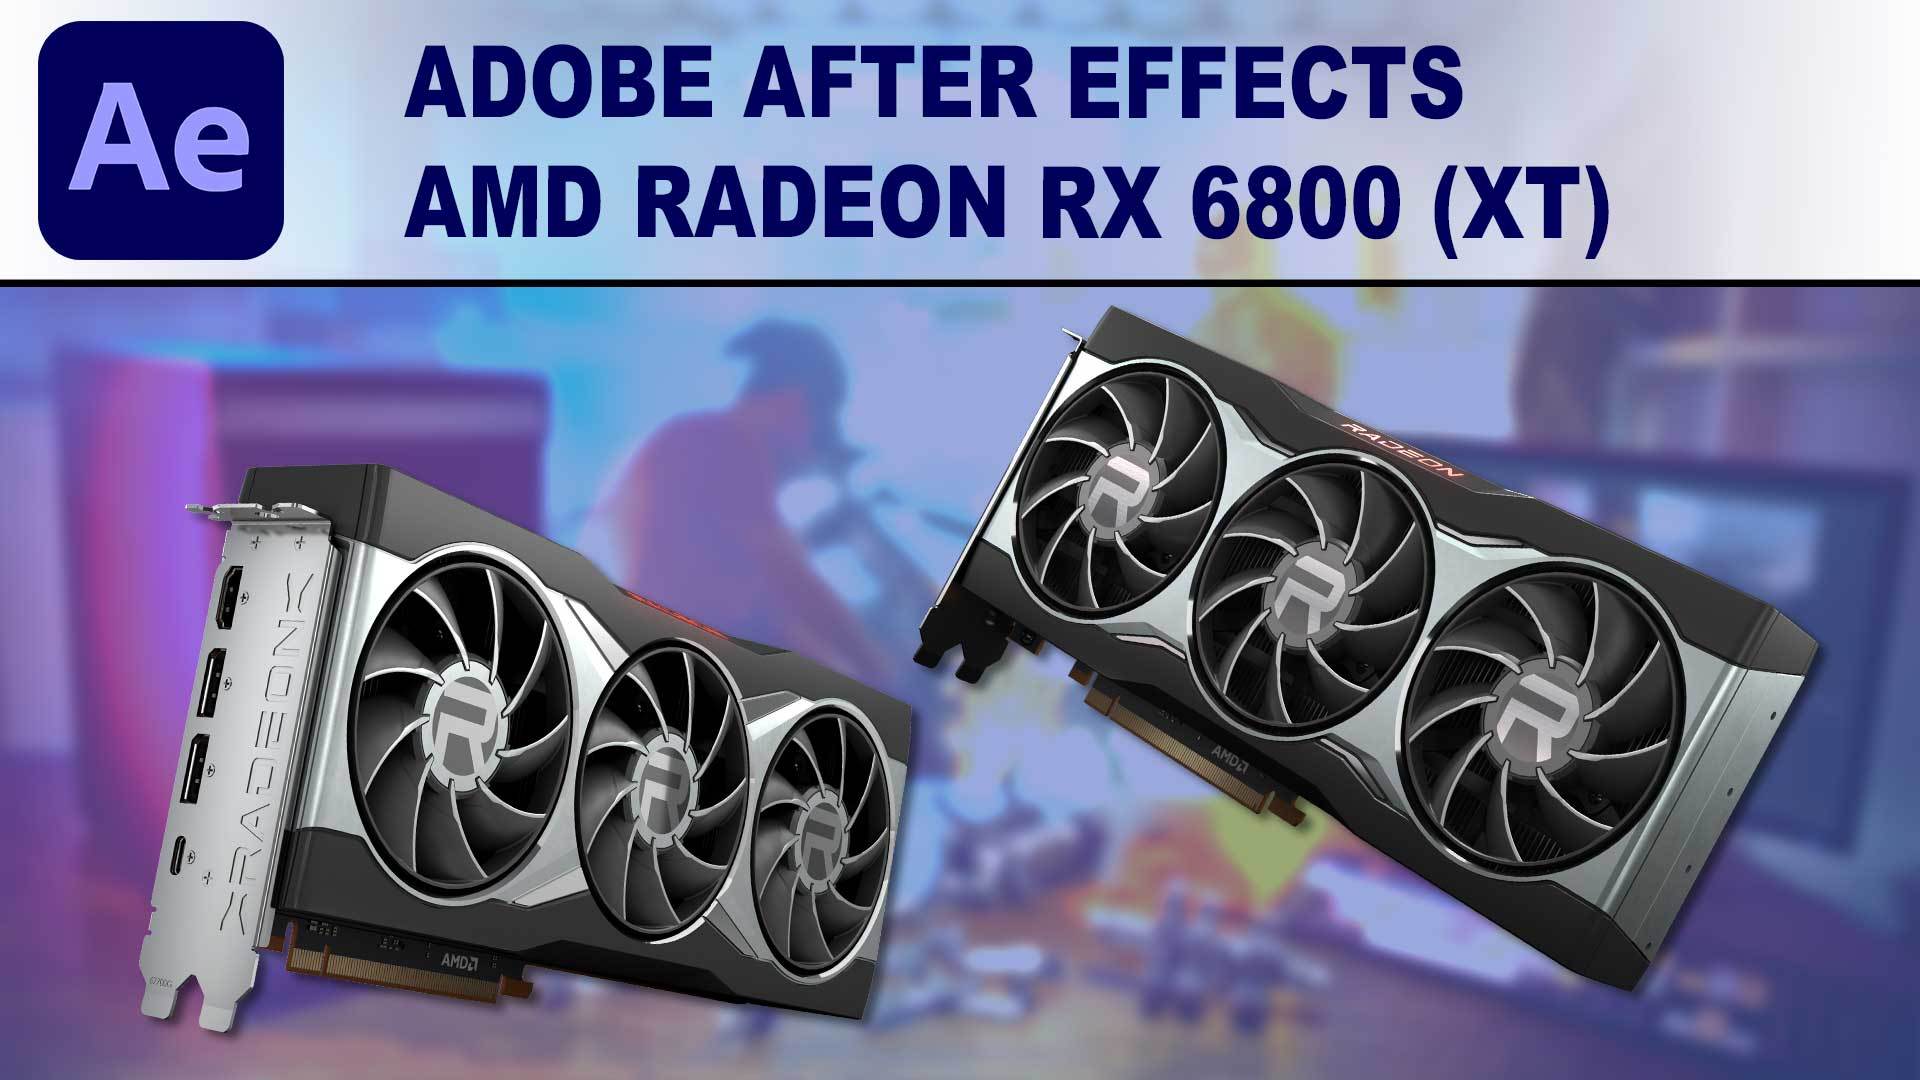 Back on top?! AMD Radeon RX 6800 and RX 6800 XT Review - Feel the same, but  with big differences in detail